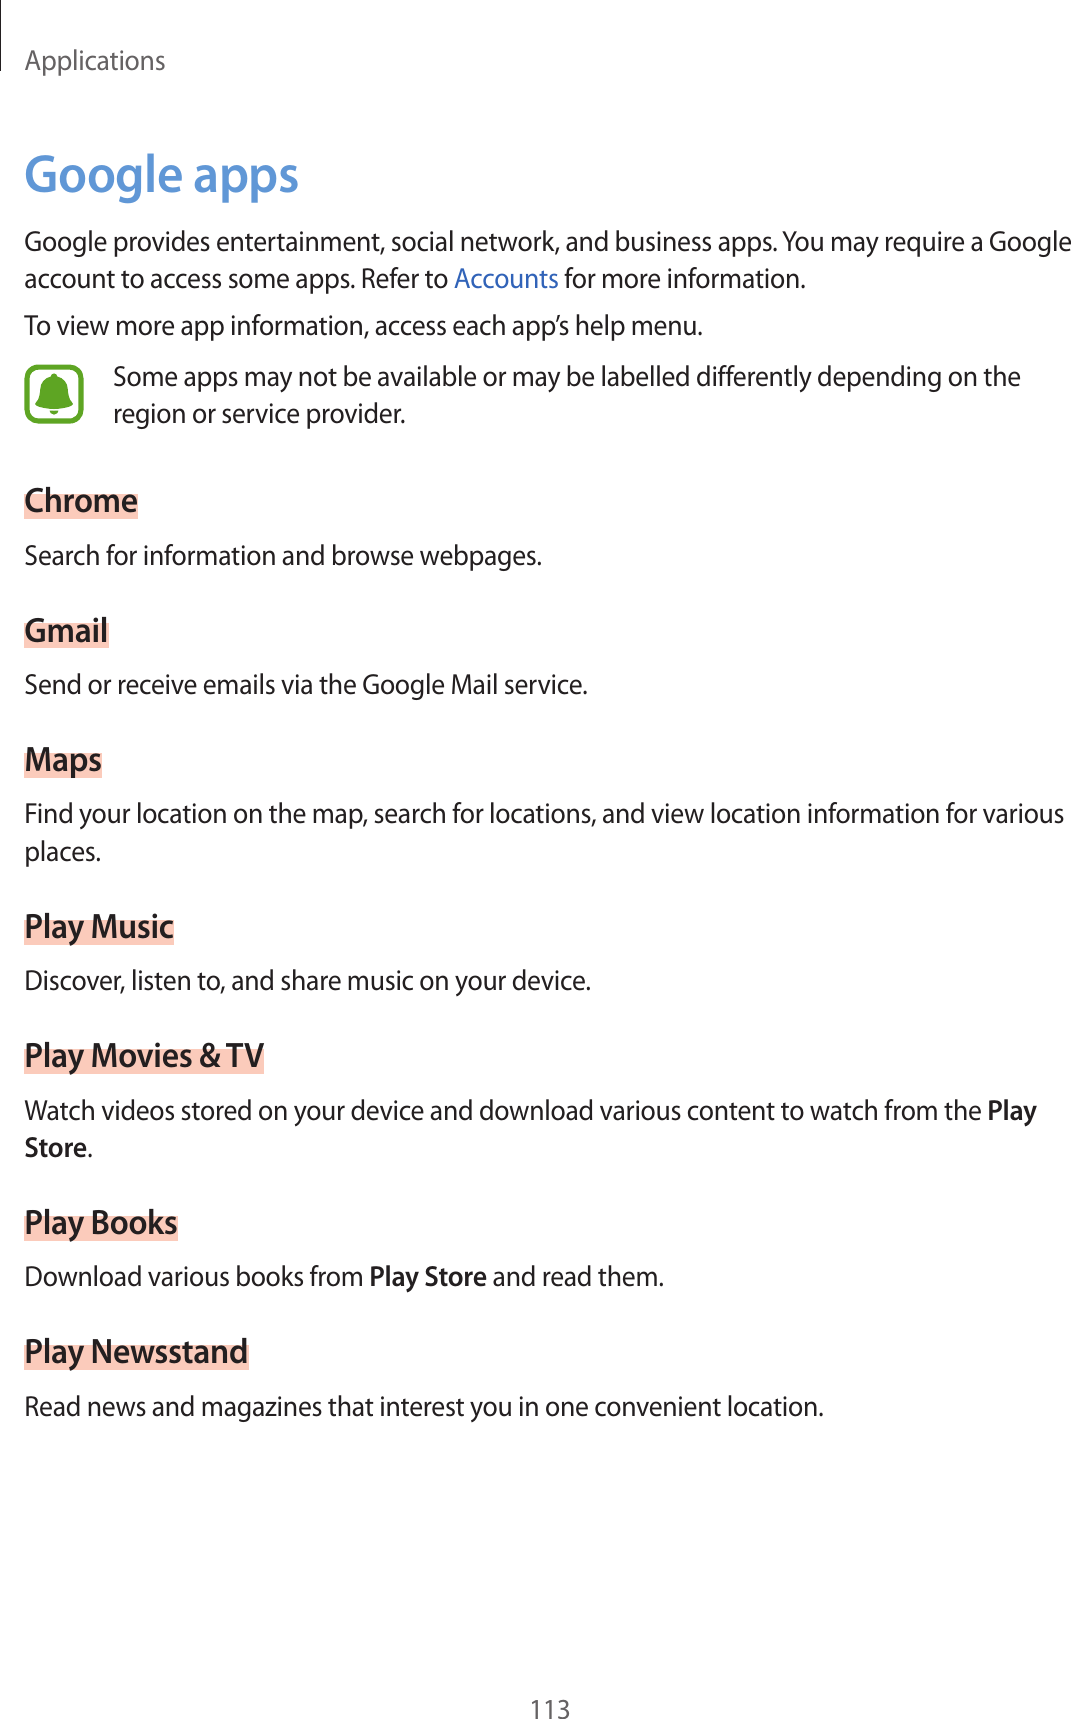 Applications113Google appsGoogle provides ent ertainment, social network, and business apps. You may requir e a Google account t o ac cess some apps . Ref er t o Accounts for mor e inf ormation.To view more app inf ormation, ac cess each app’s help menu.Some apps may not be available or ma y be labelled diff er en tly depending on the region or service provider.ChromeSearch for information and browse w ebpages .GmailSend or receiv e emails via the Google Mail service.MapsF ind y our loca tion on the map, search f or locations , and view location information for various places.Play MusicDiscov er, listen to, and share music on your devic e .Play Mo vies &amp; TVWatch videos stor ed on y our device and do wnload various c ont ent t o wat ch fr om the Play Store.Play BooksDownload various books from Play St or e and read them.Play Ne w sstandRead news and magazines that inter est y ou in one c on v enien t location.